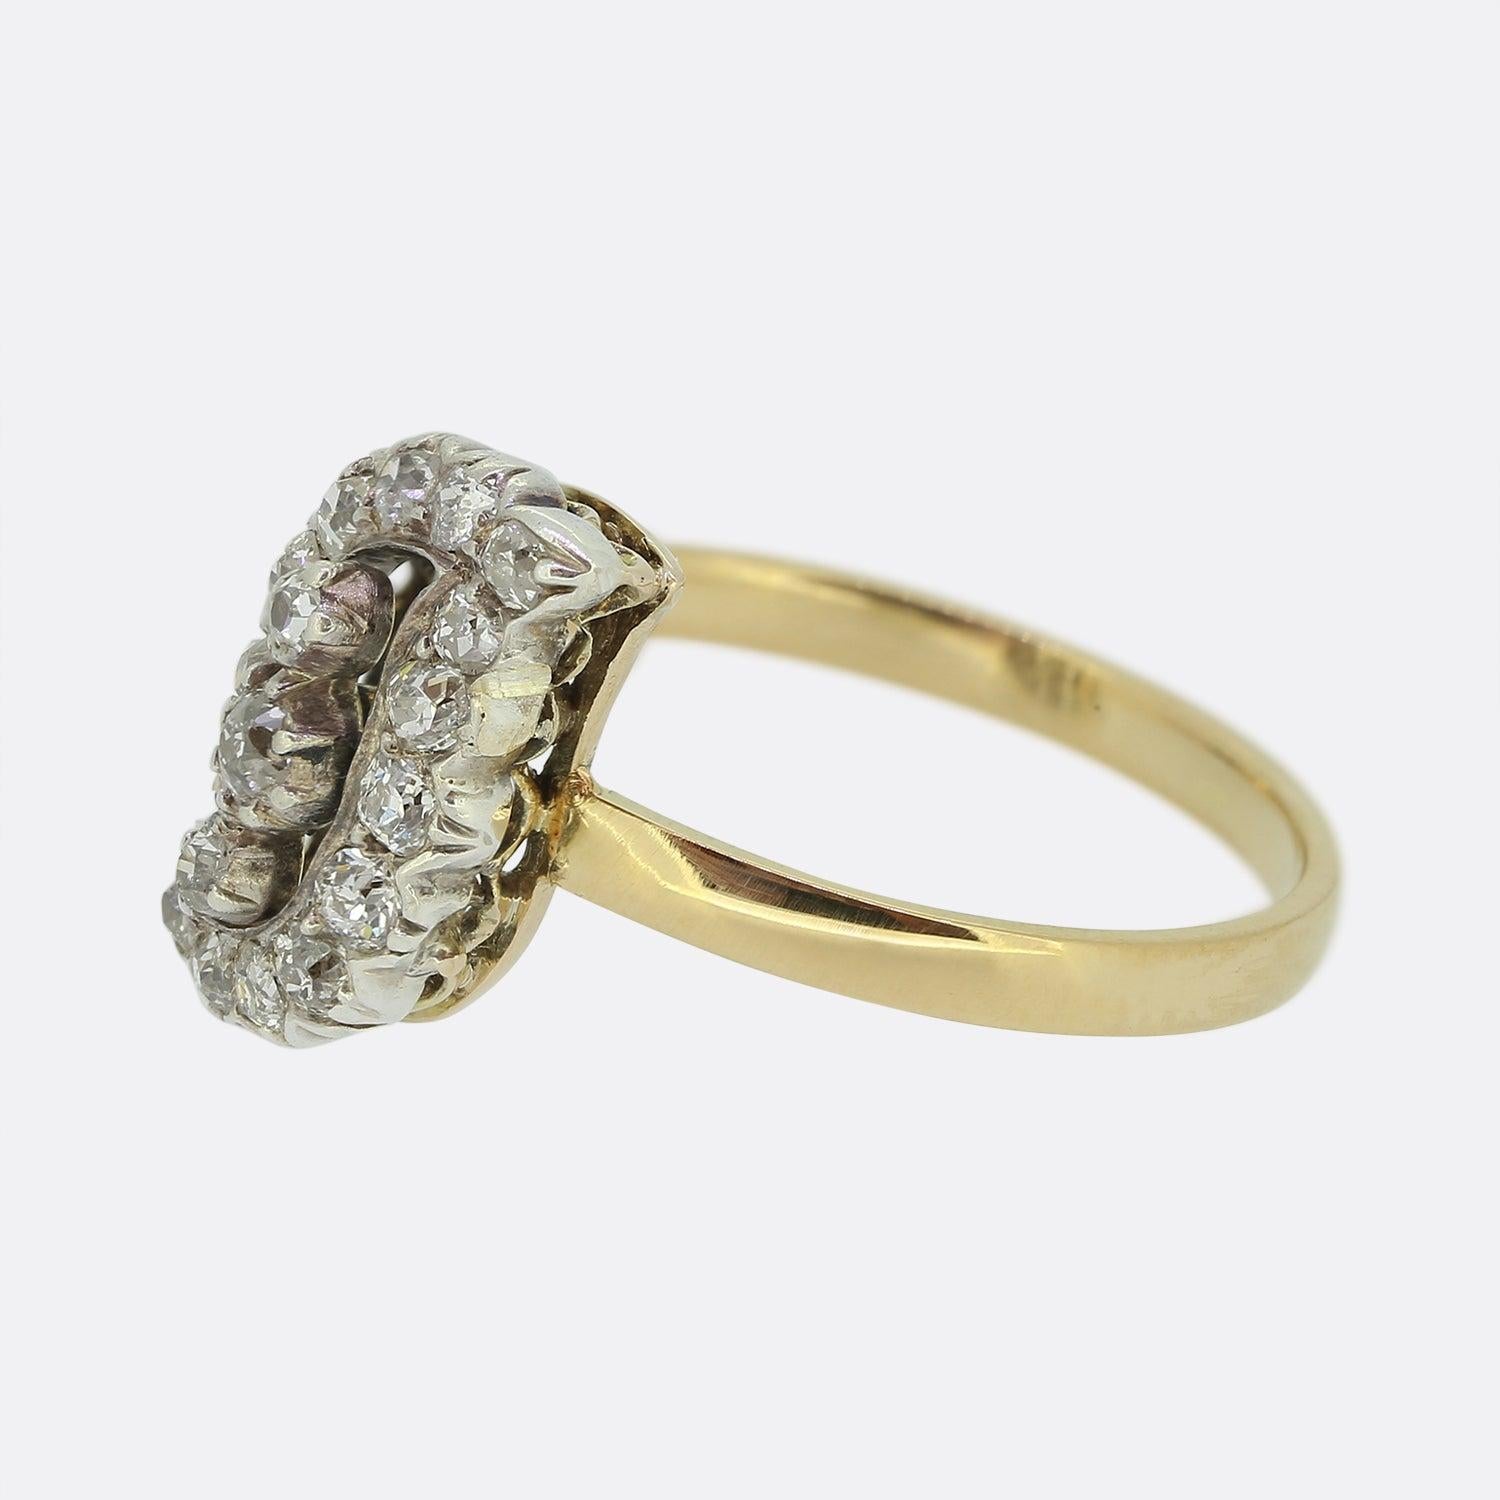 Here we have a fabulous diamond ring originally dating back to Victorian period. Three collet-set old cut diamonds sit proud at the centre of an open face. This trio is surrounded by a swirling motif adorned with a single row of matching old cut